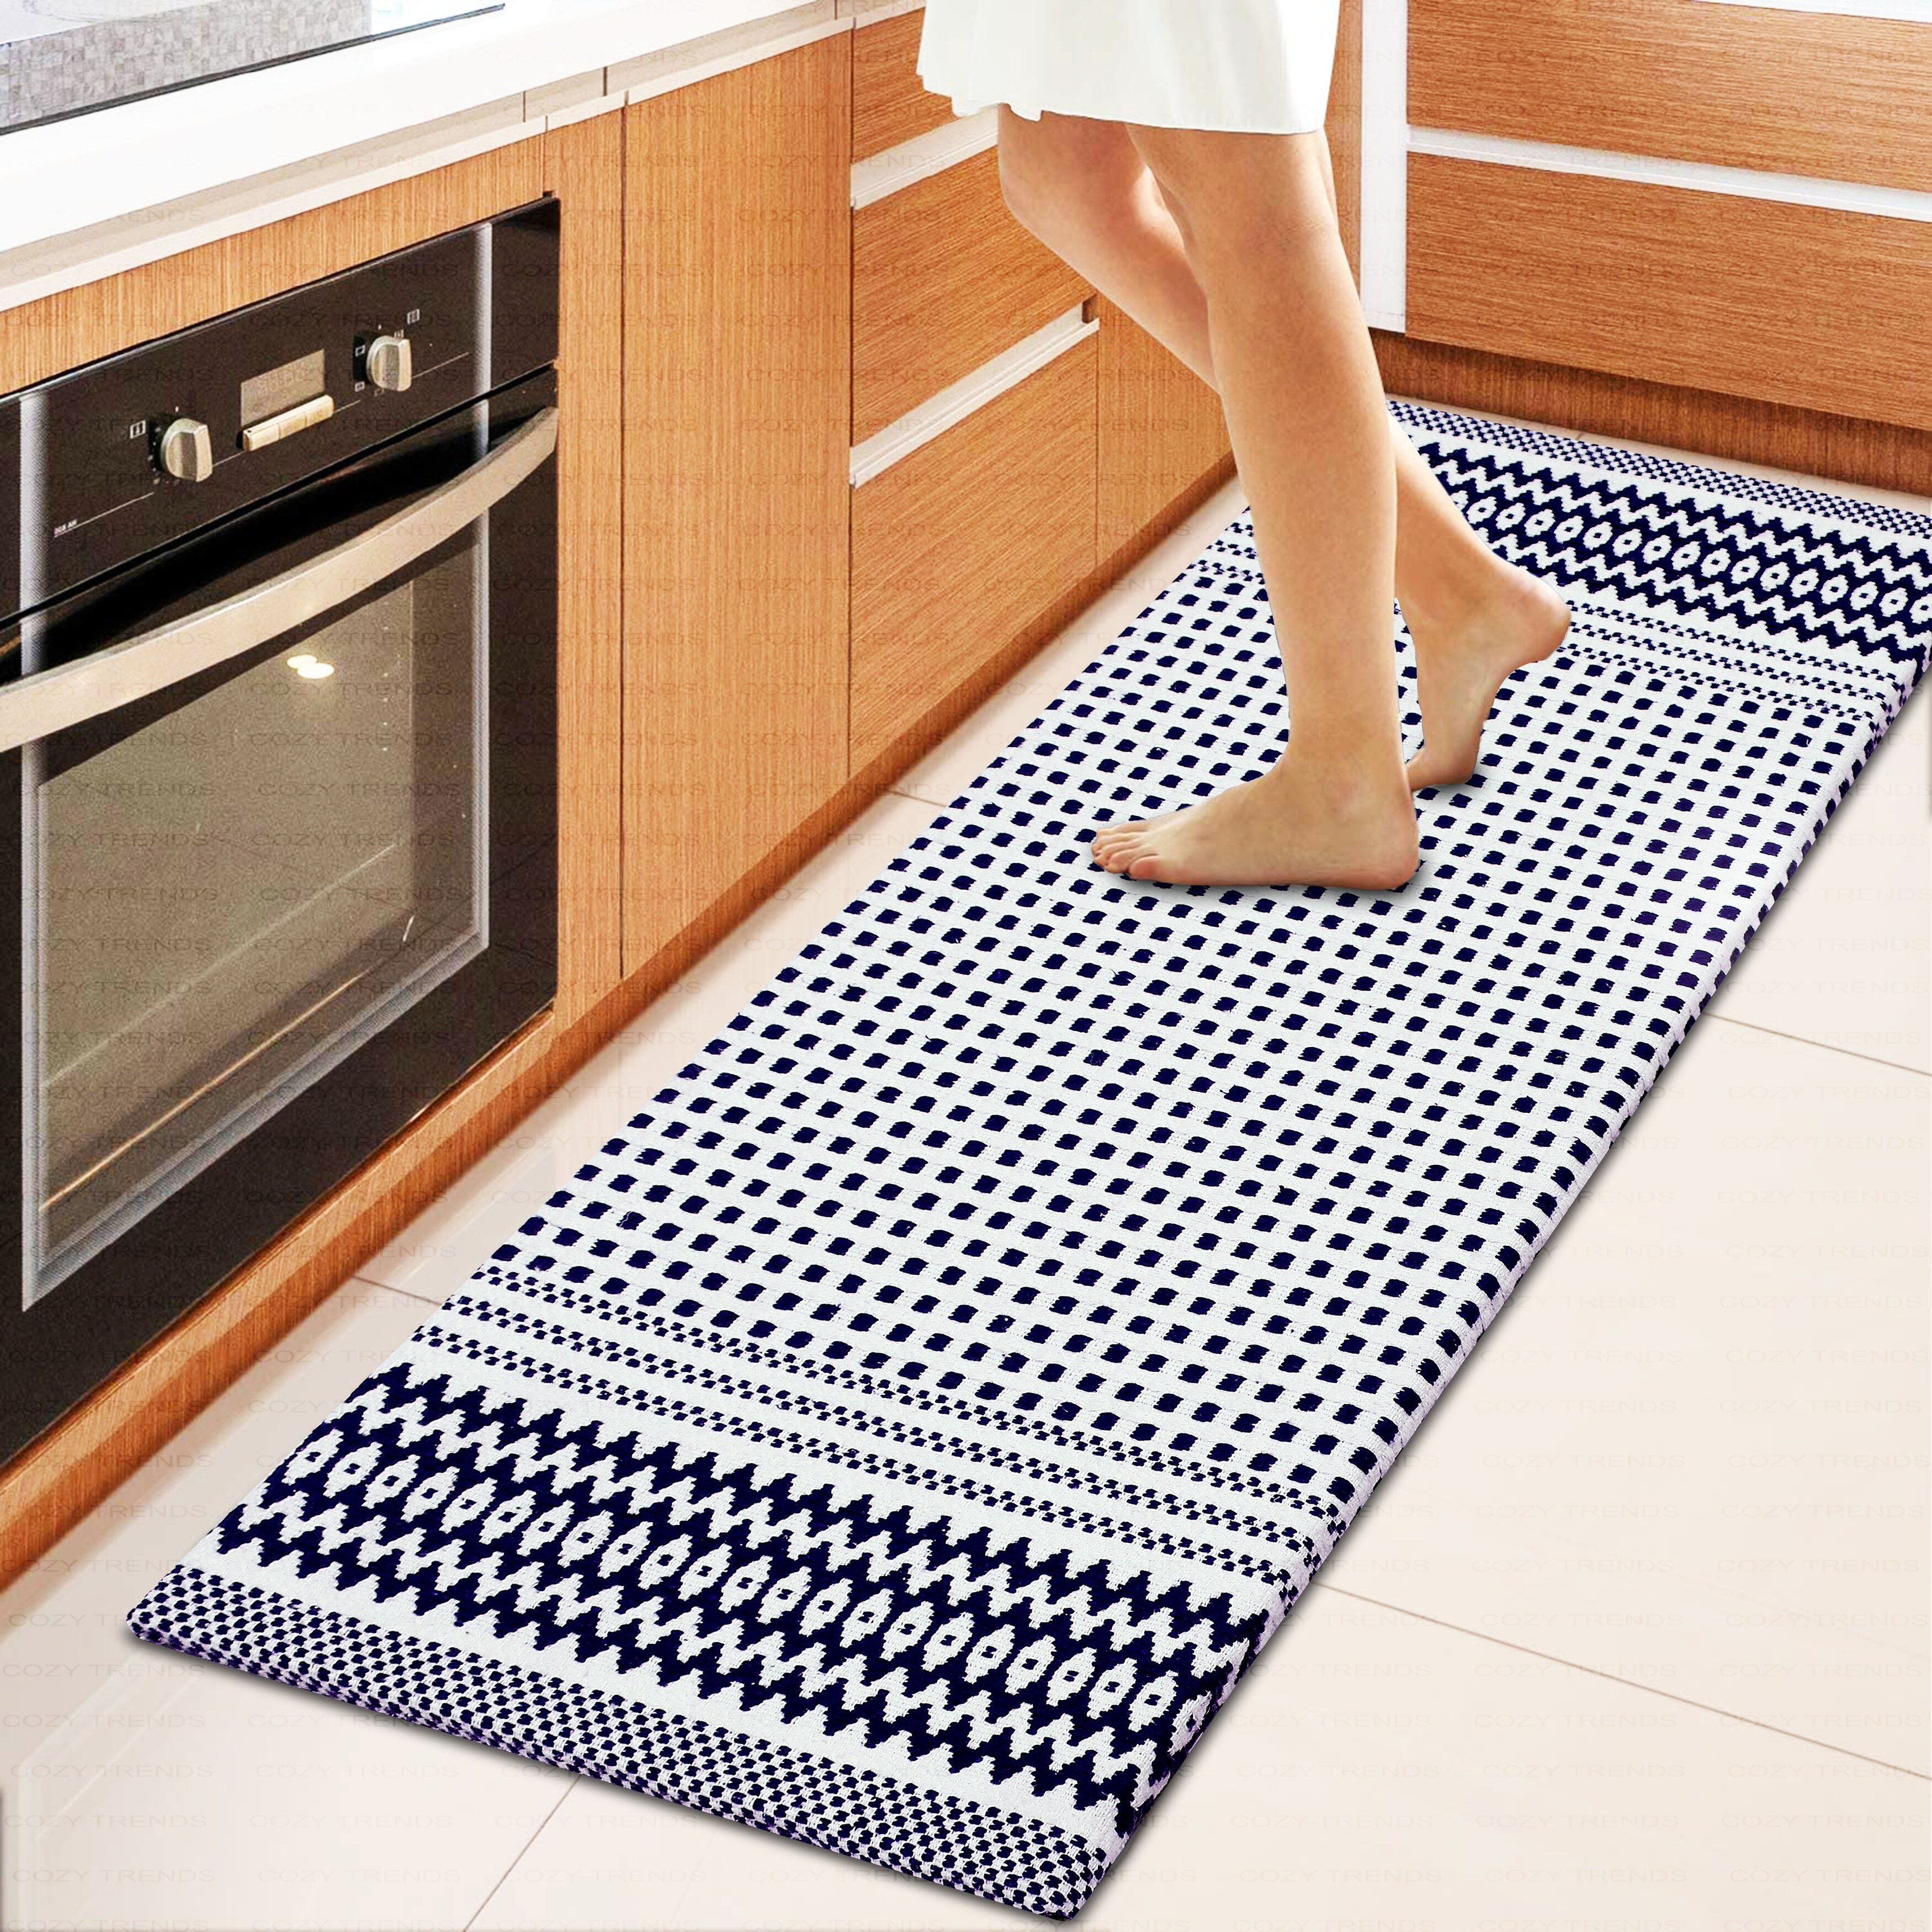 https://ak1.ostkcdn.com/images/products/is/images/direct/c314e7037d16043fb93c32b7684f9b65fa3fe2c5/Kitchen-Runner-Rug--Mat-Cushioned-Cotton-Hand-Woven-Anti-Fatigue-Mat-Kitchen-Bathroom-Bed-side-18x48%27%27.jpg